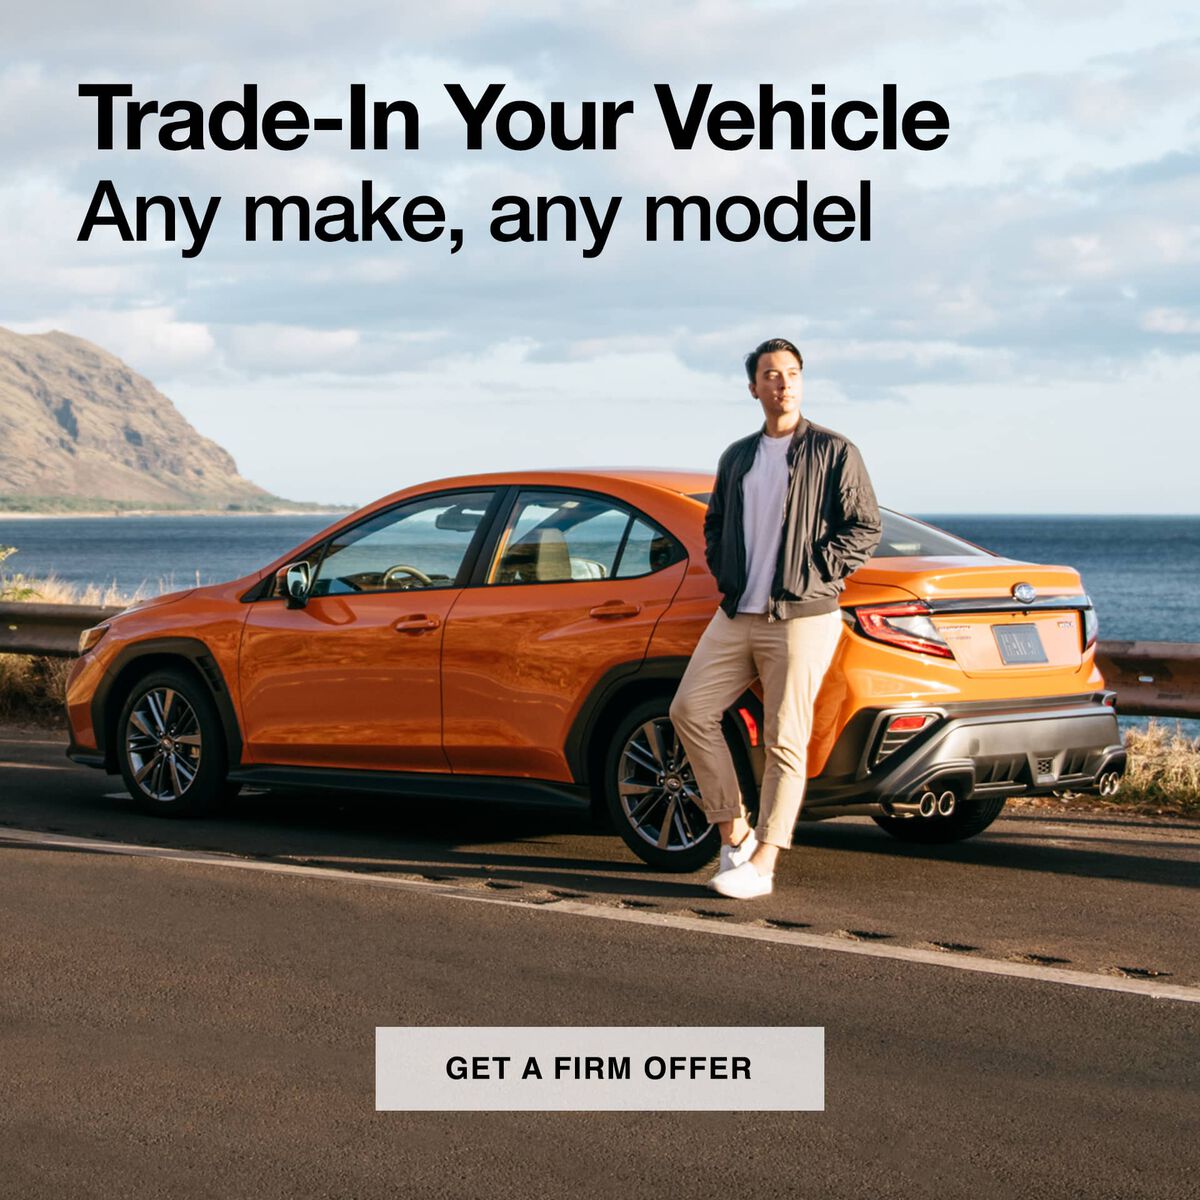 Trade-in your vehicle. Get a firm offer today.